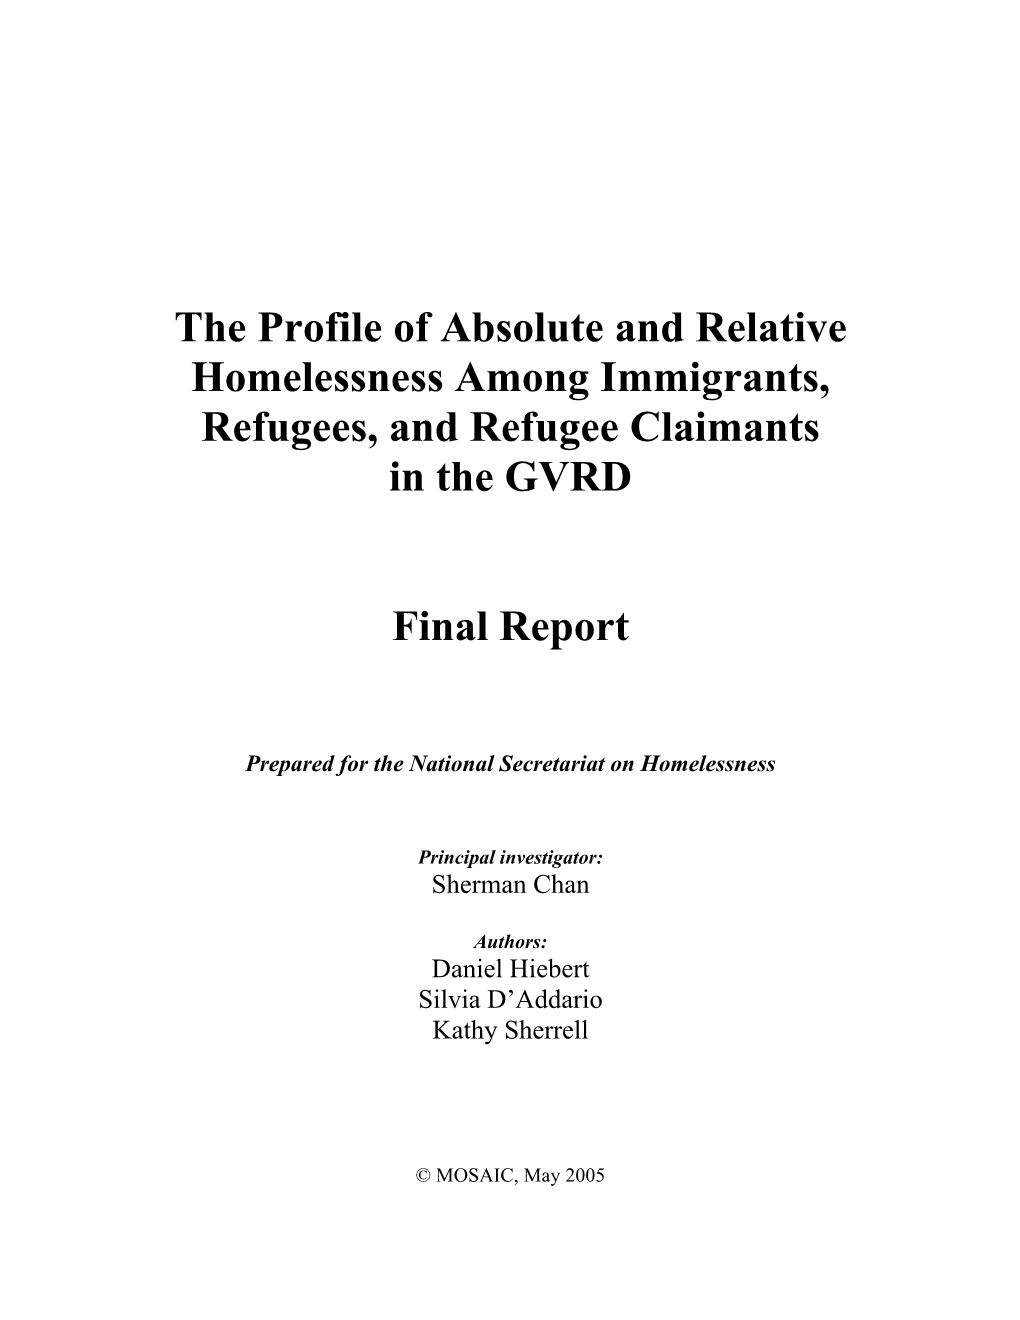 The Profile of Absolute and Relative Homelessness Among Immigrants, Refugees, and Refugee Claimants in the GVRD